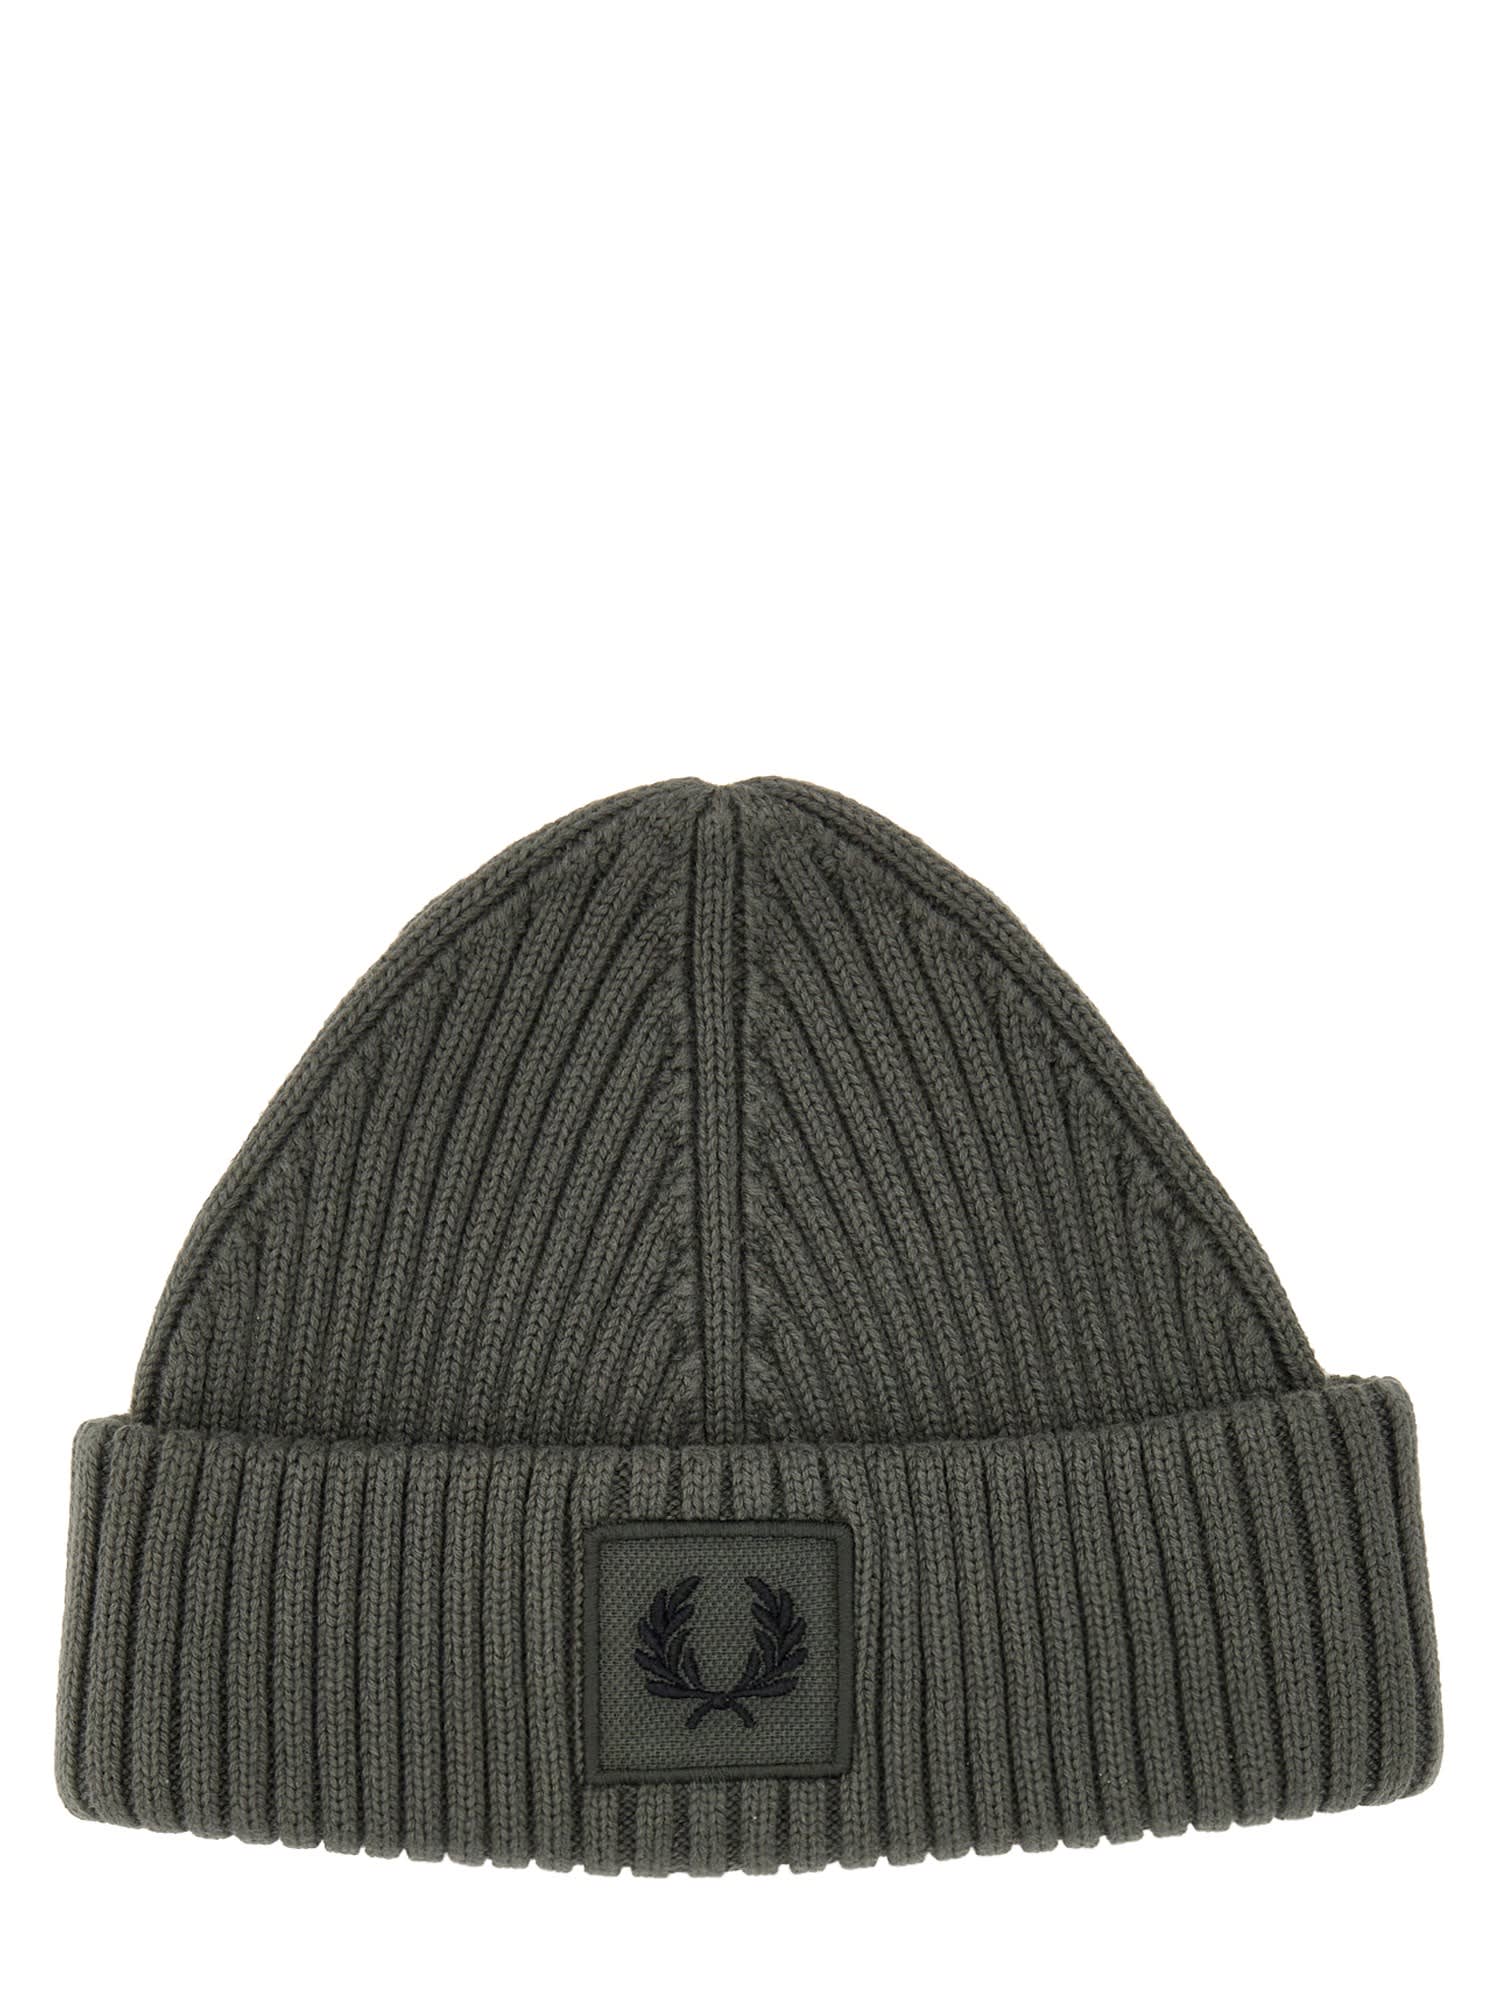 FRED PERRY BEANIE HAT WITH LOGO